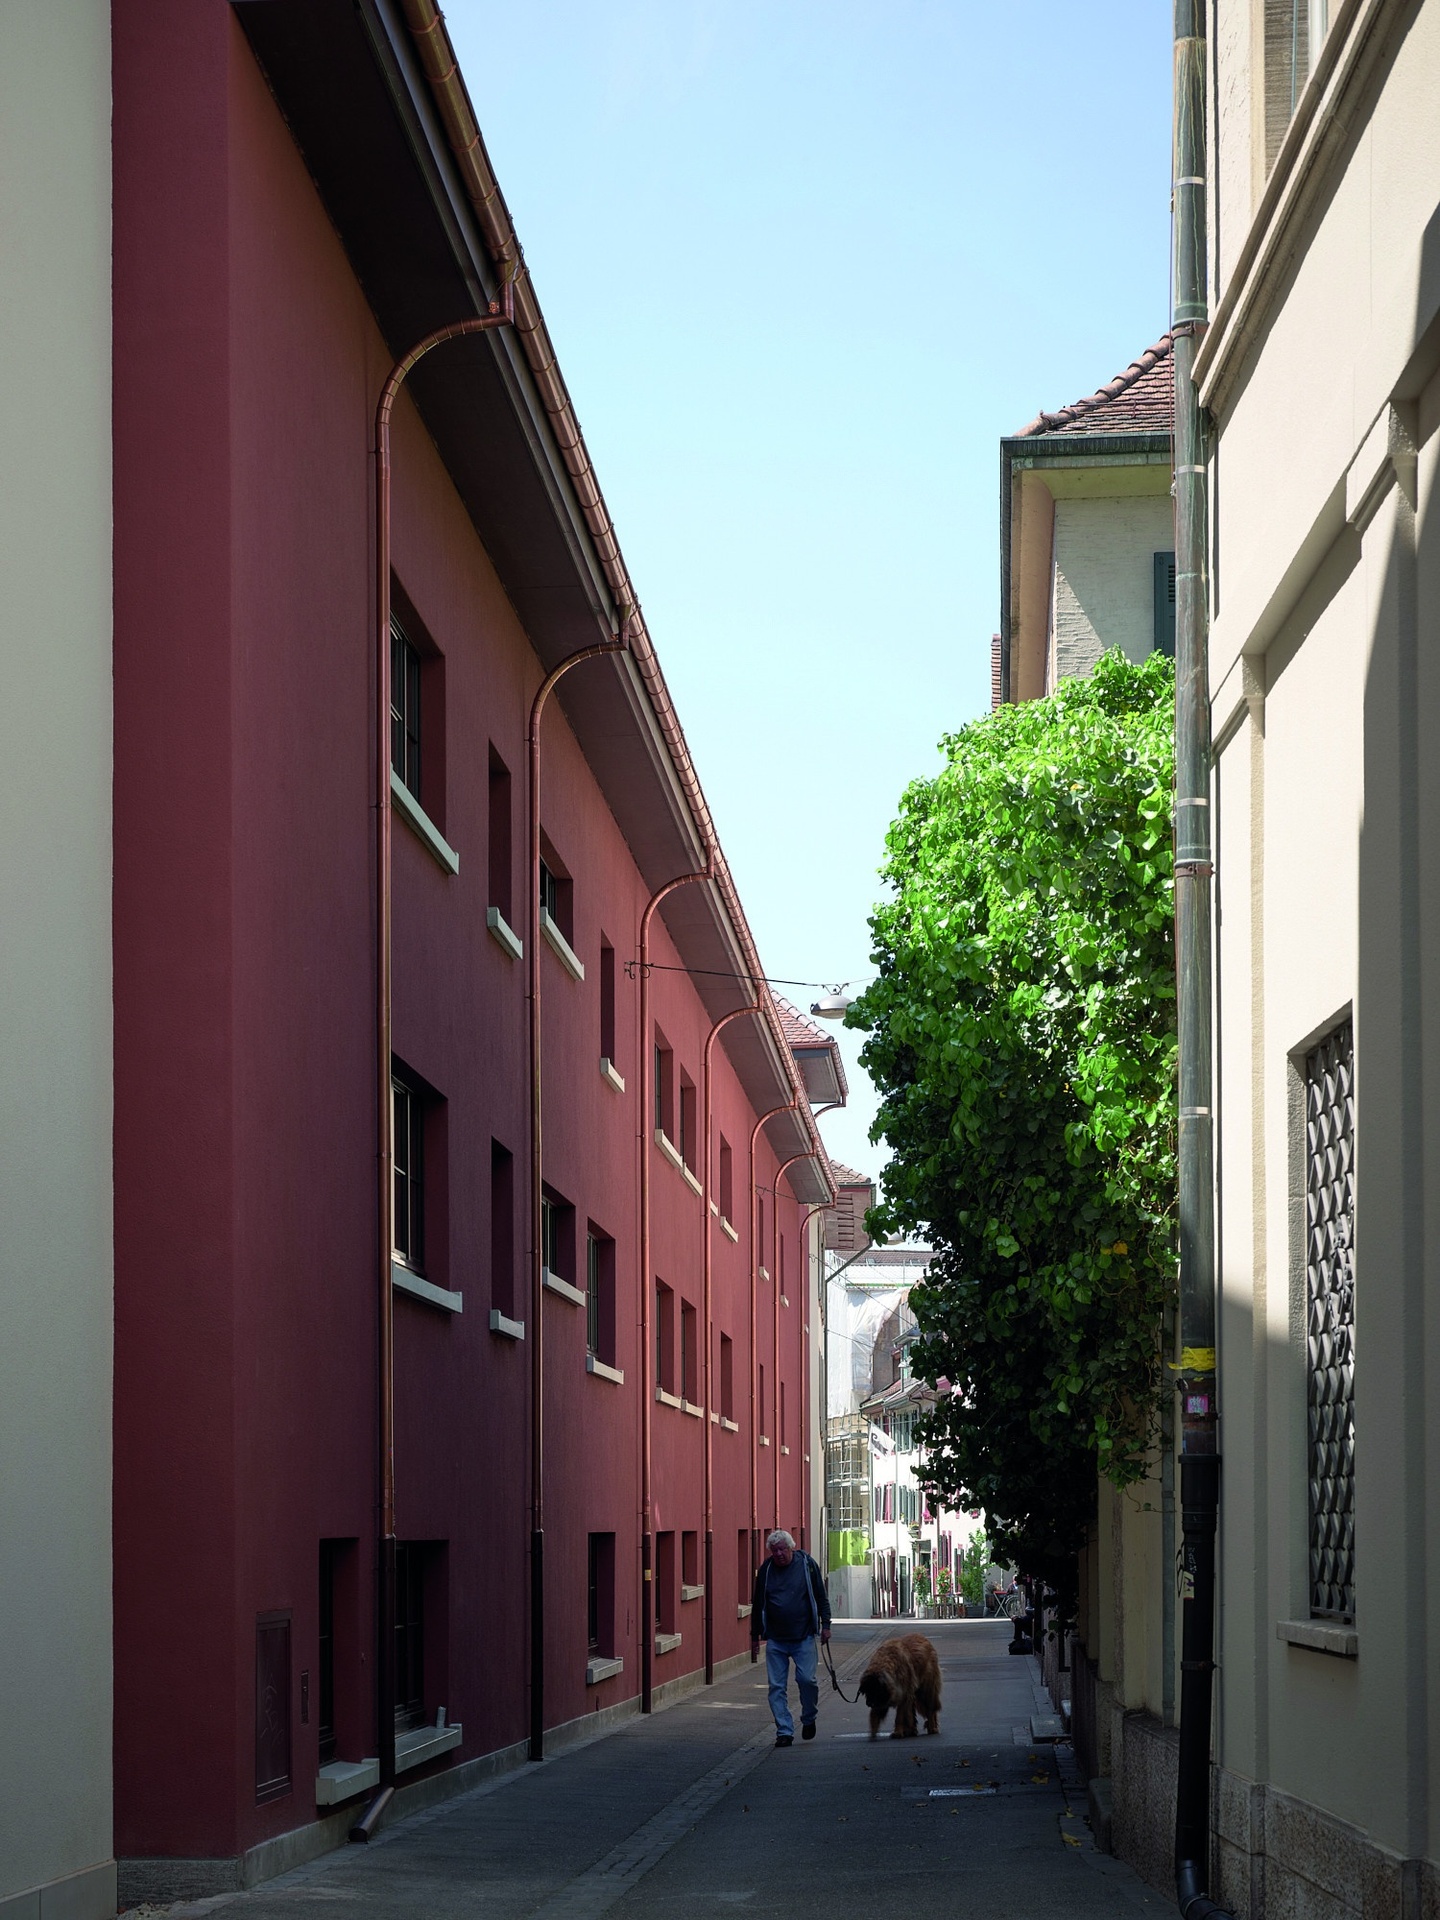 Photo of a person walking a dog through a narrow street between two tall buildings.